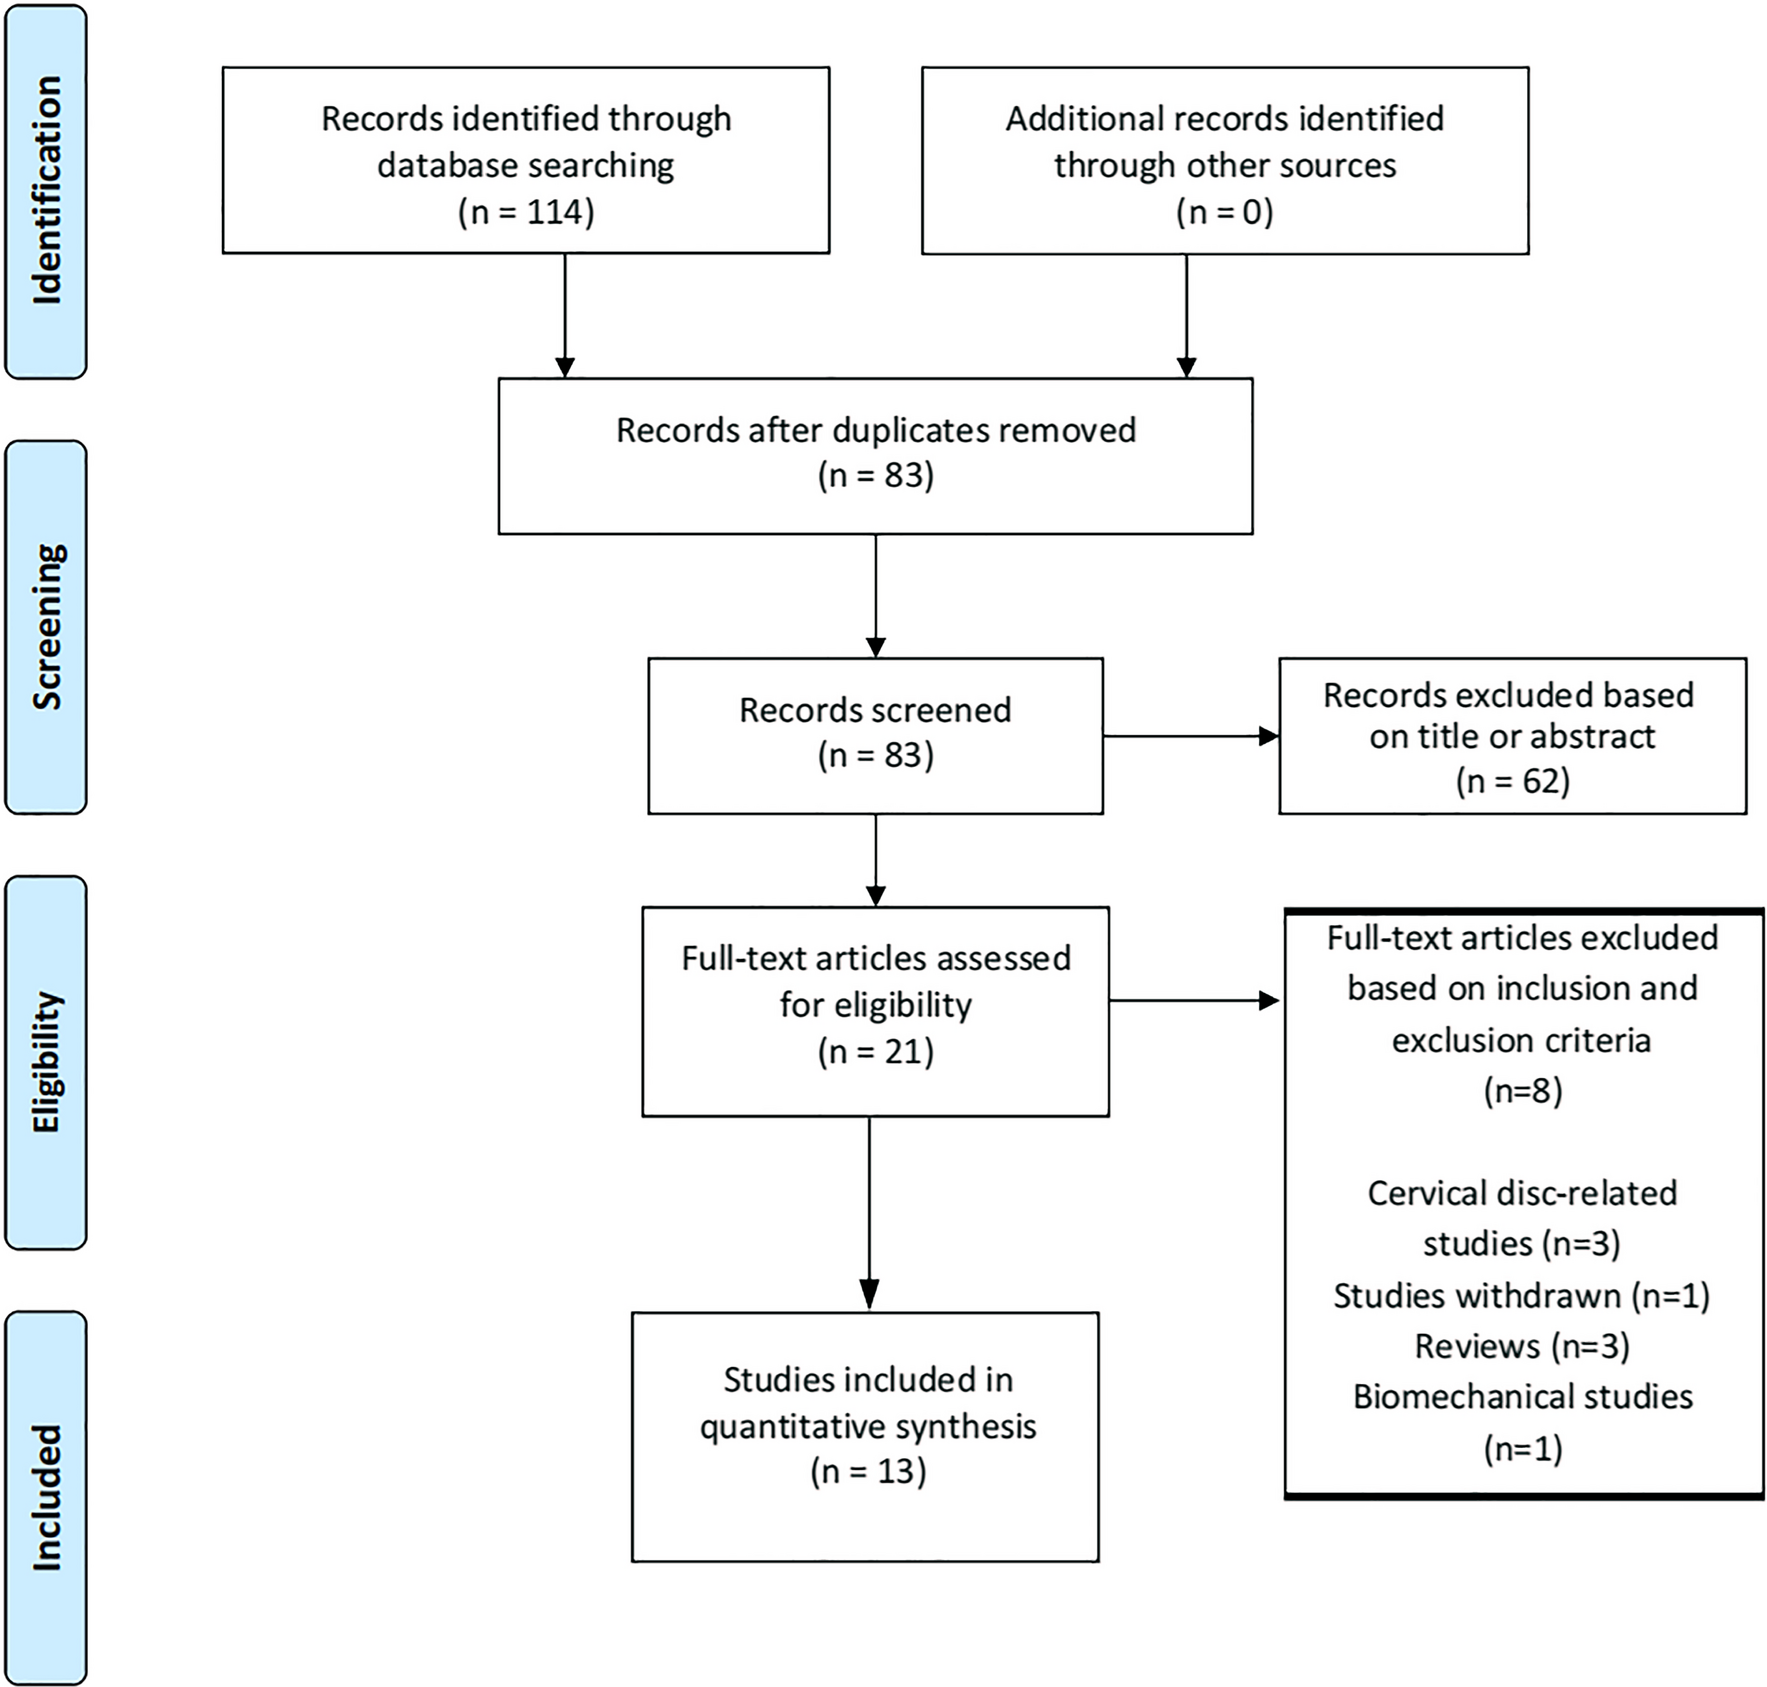 New evidence on the controversy over the correlation between vertebral osteoporosis and intervertebral disc degeneration: a systematic review of relevant animal studies